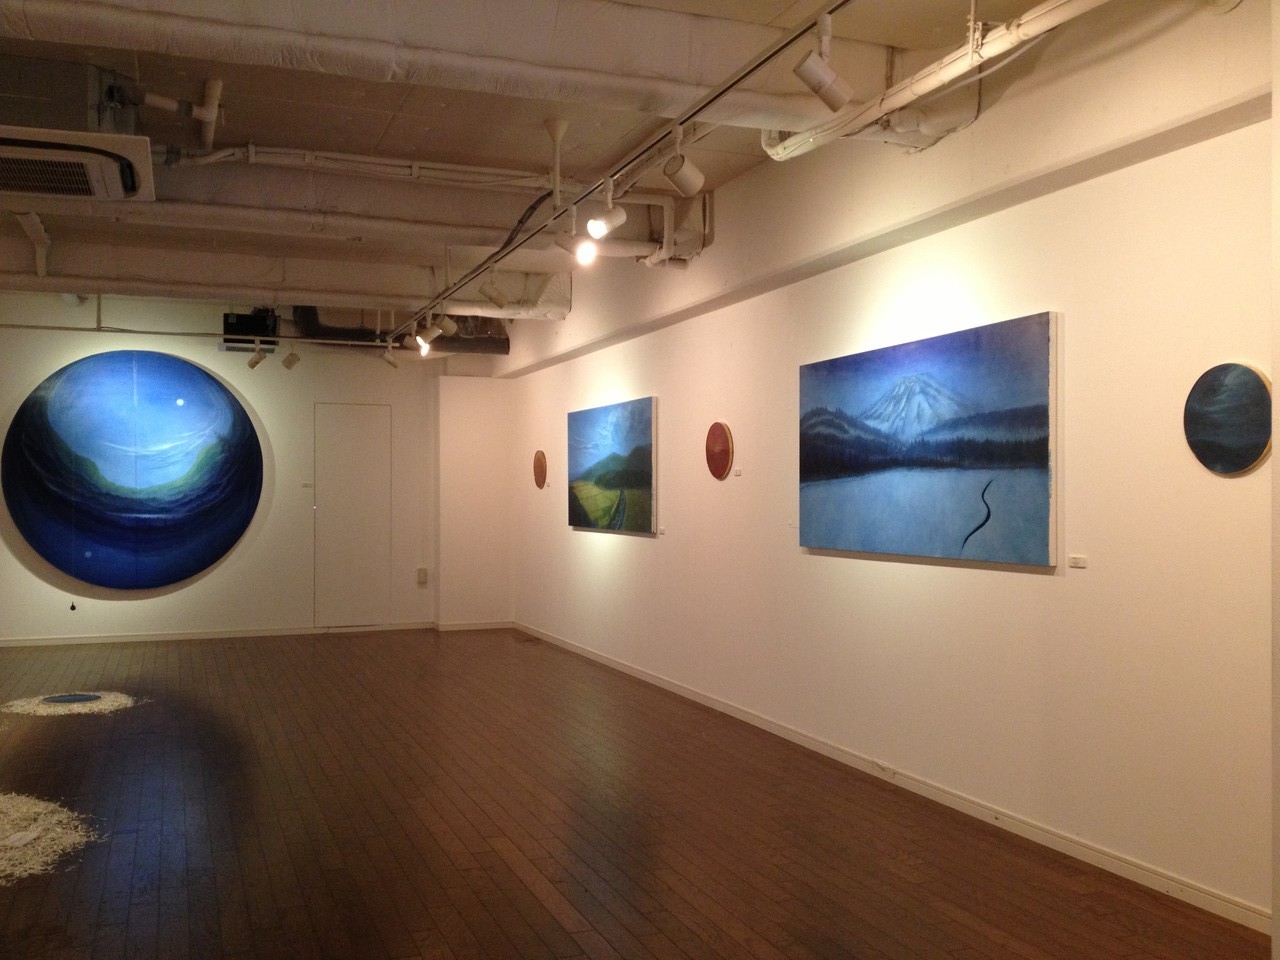 「youichi kayama exibition」@The Artcomplex Center of Tokyo .ACT 5. 2013.3.5-3.10